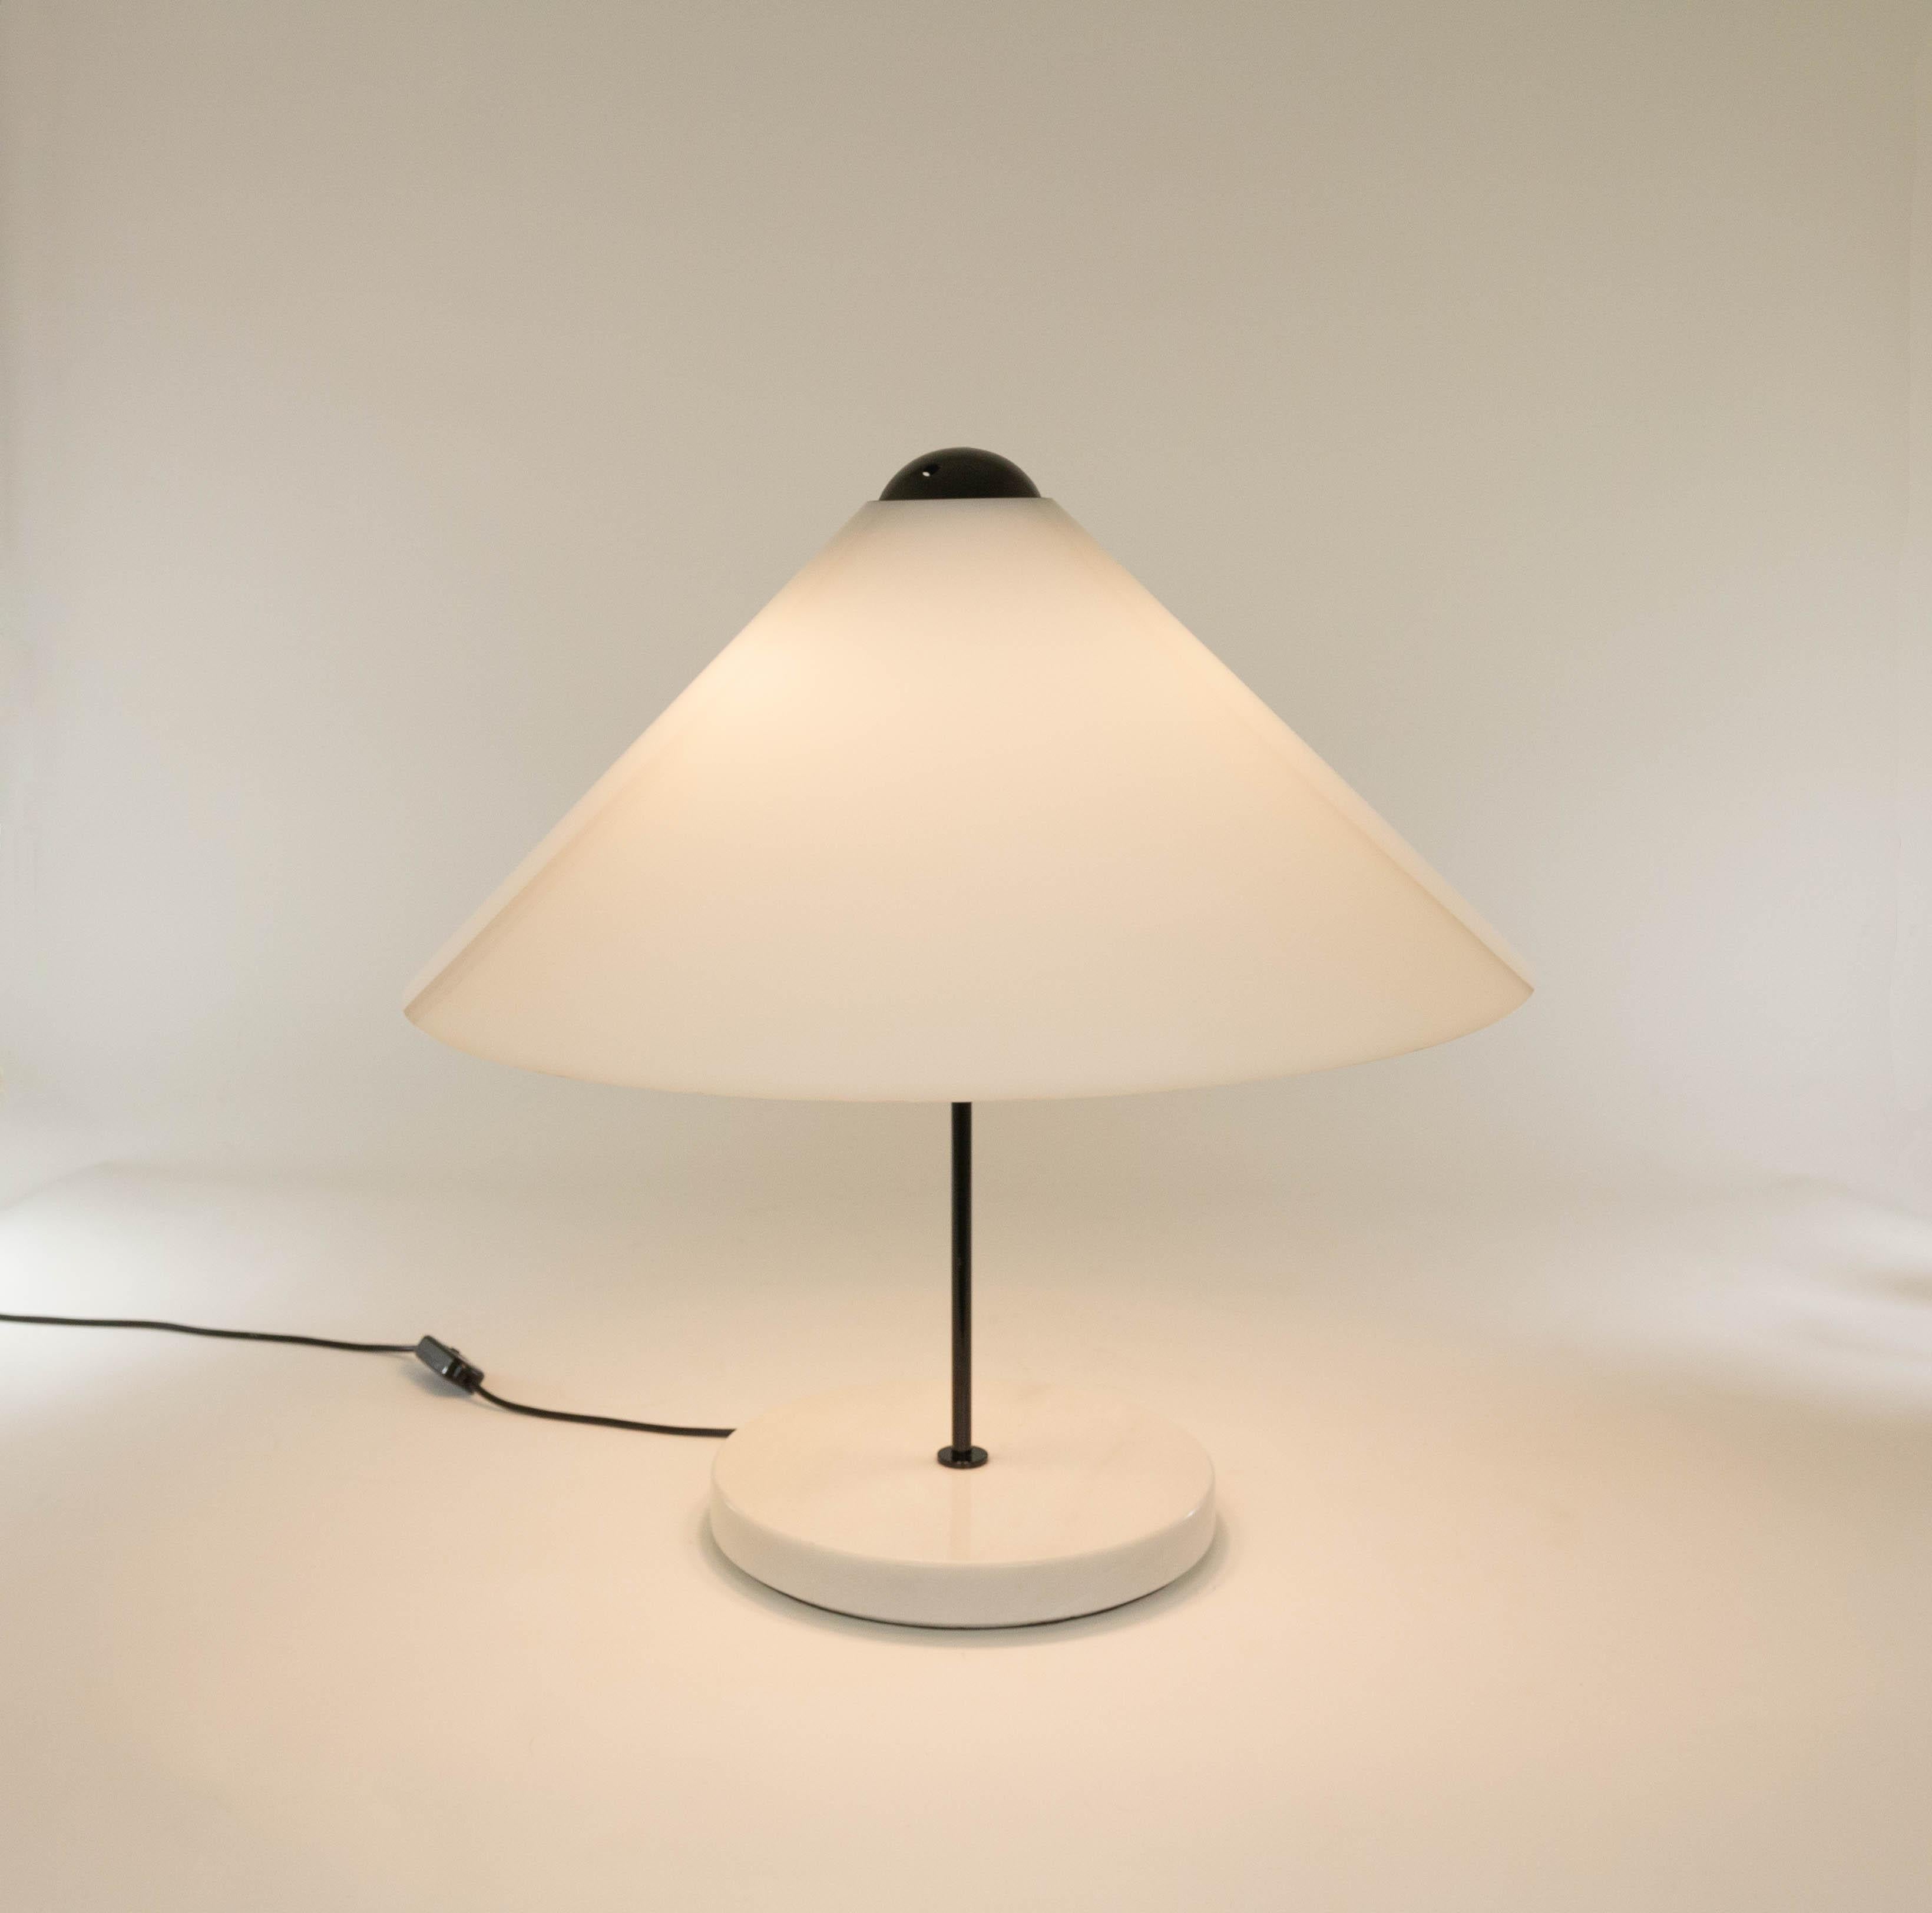 Large Snow 201 table lamp designed by Vico Magistretti (in 1973) and manufactured by O-luce as from 1974.

The table lamp features a white marble cylindrical base, black lacquered stem and an opal methacrylate cone shaped shade. The end of the